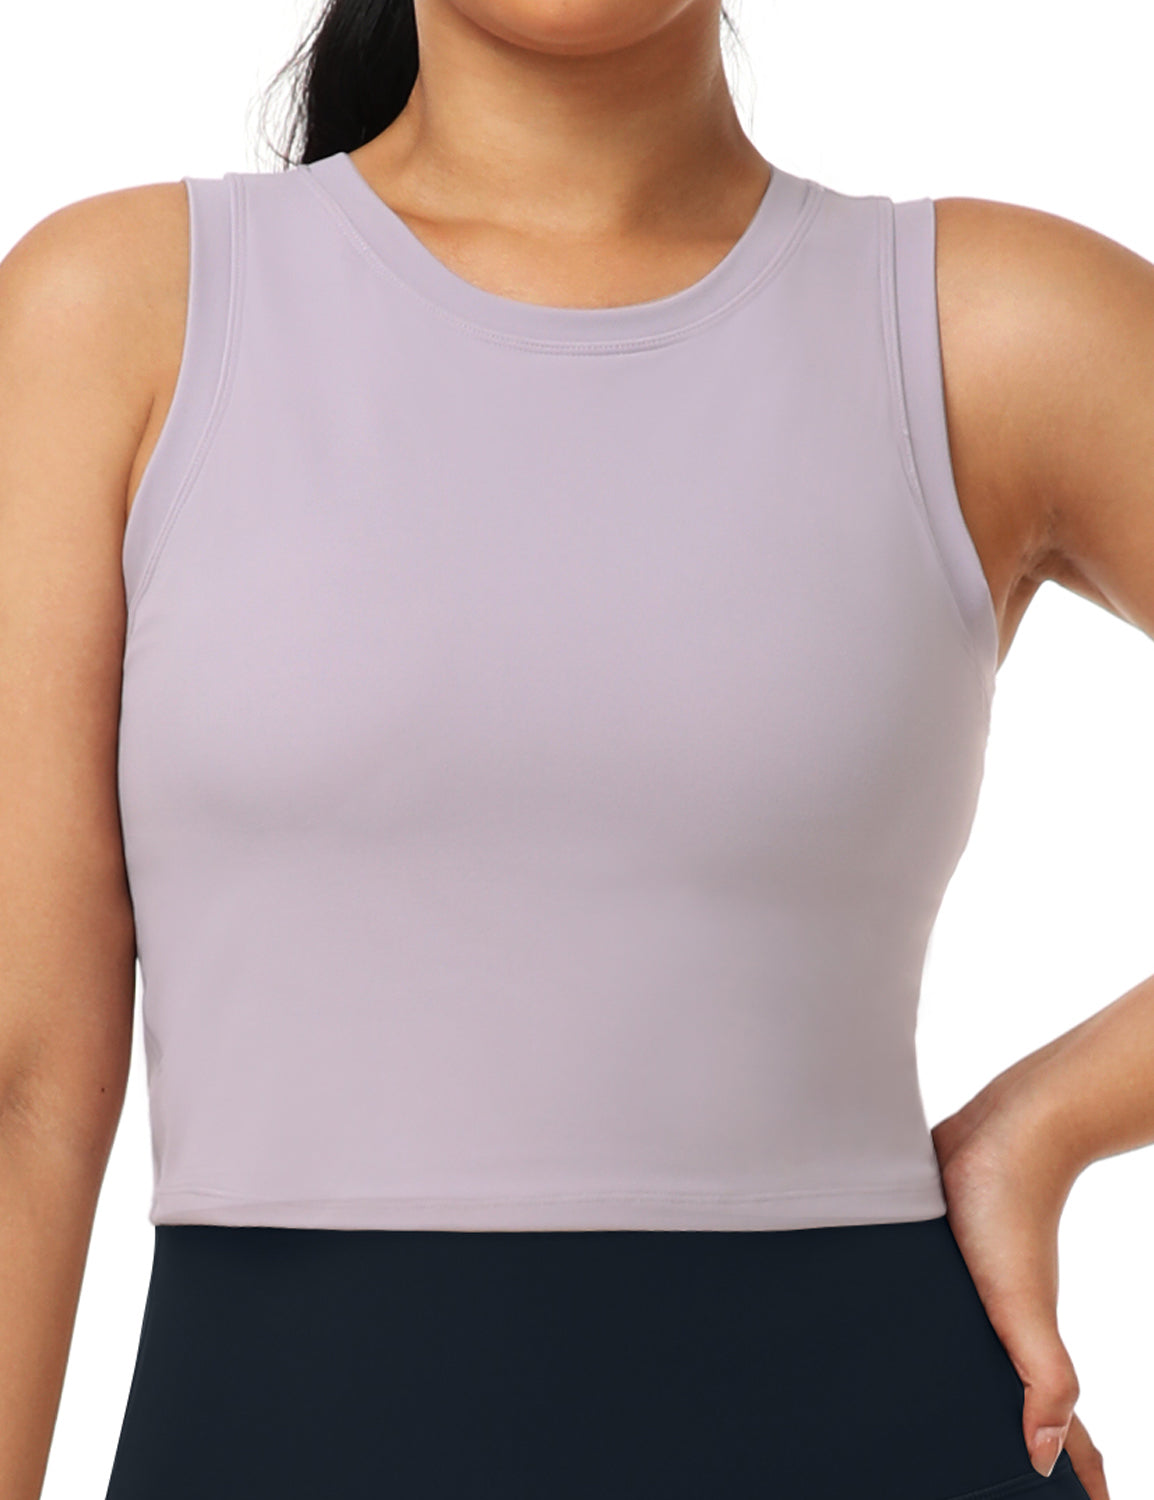 HeyNuts Wherever Crop Top Workout Tank Tops No Padding